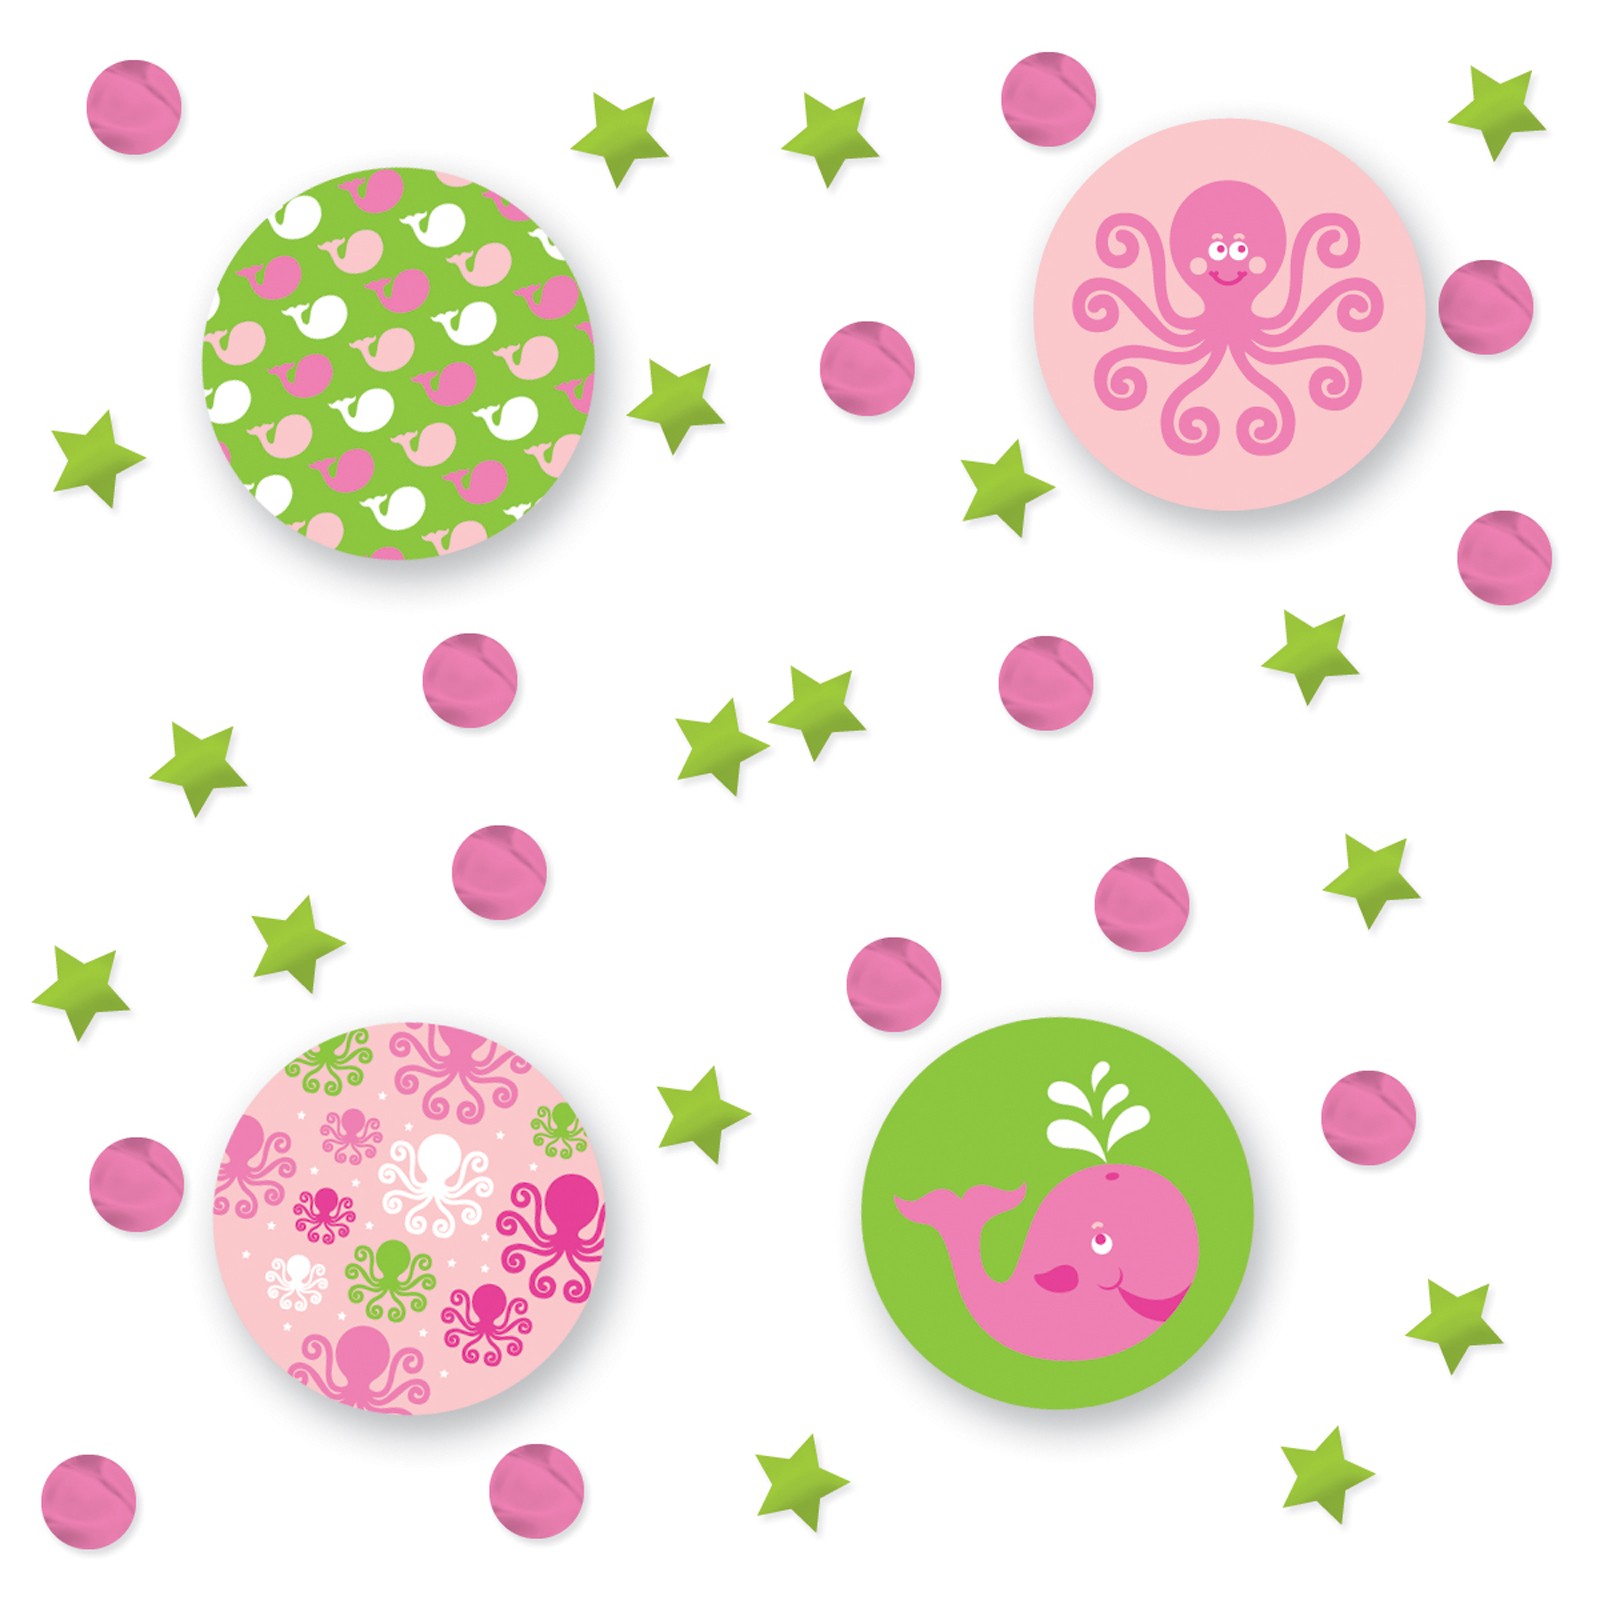 Baby Shower Confetti : Parties4Less.Net, Party supplies, party ...